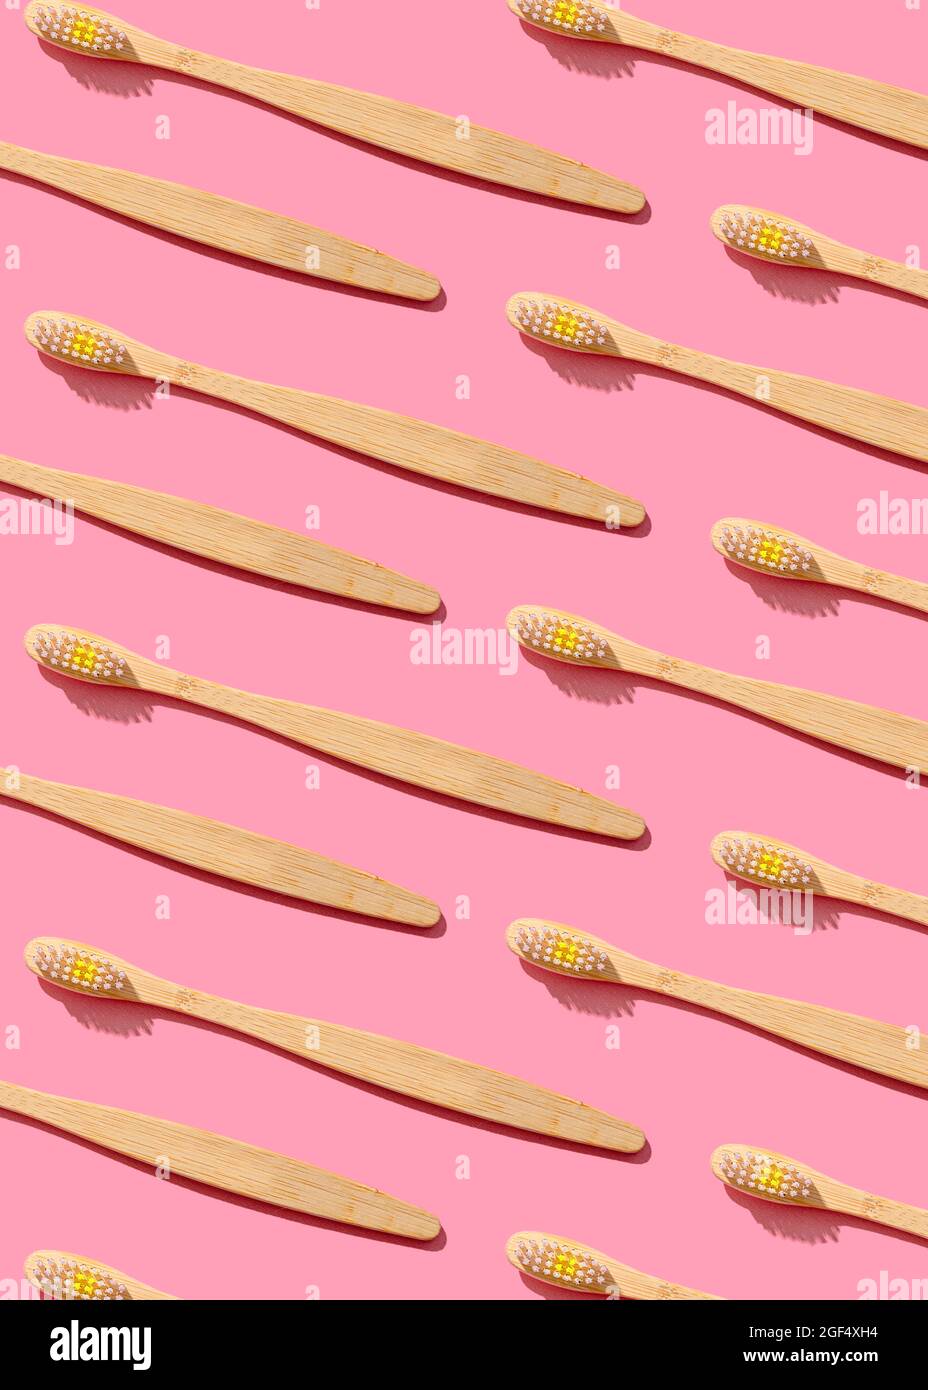 Pattern of wooden toothbrushes flat laid against pink background Stock Photo